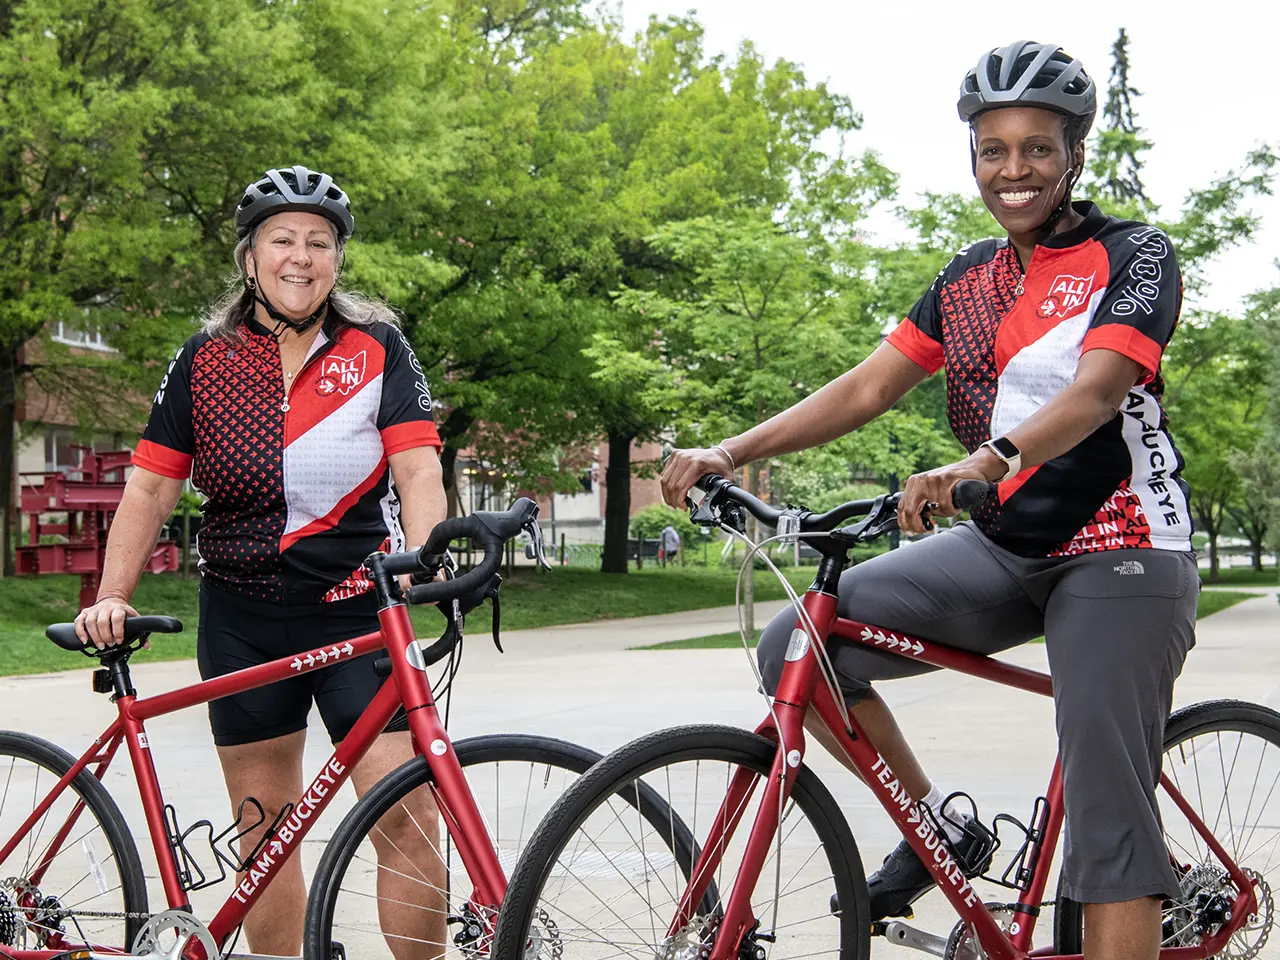 Two smiling women stand with their matching bicycles wearing matching Team Buckeye jerseys and bike helmets. On the left is Molly Ranz Calhoun, a tall white woman, and on the right is Provost Melissa Gilliam, a tall Black woman.